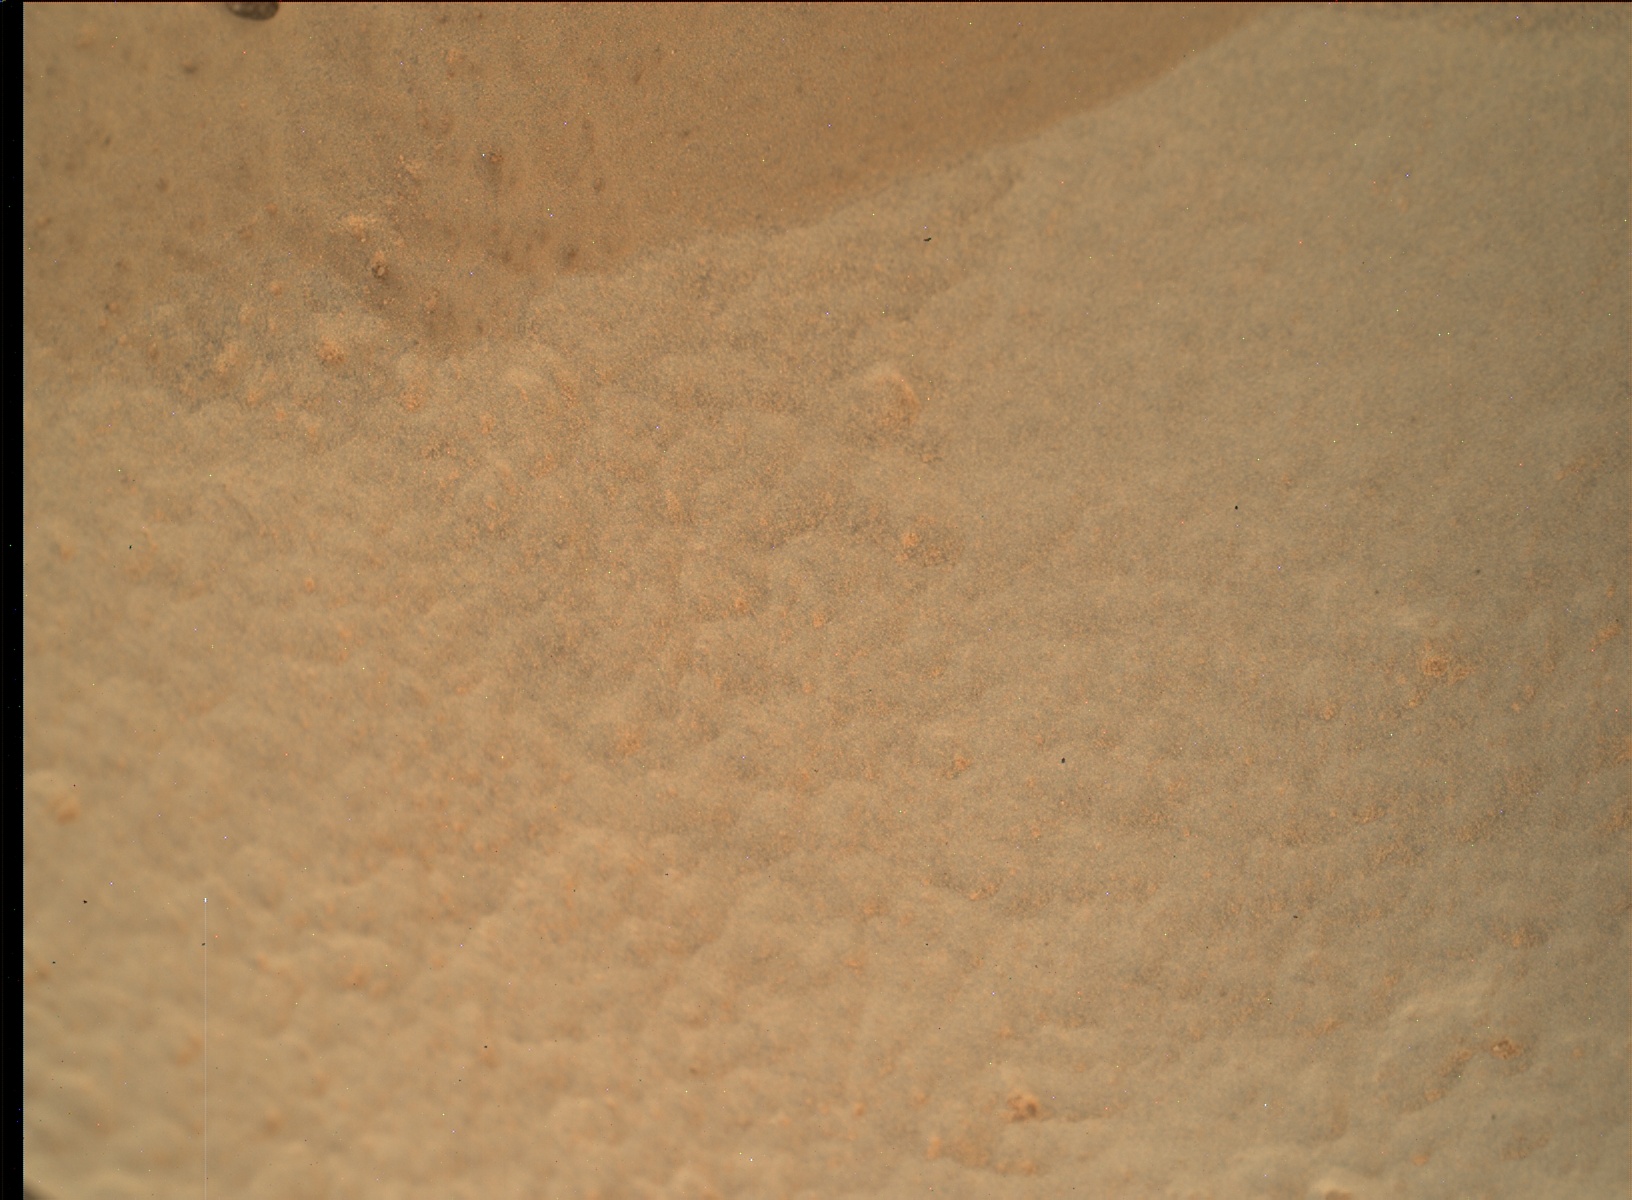 Nasa's Mars rover Curiosity acquired this image using its Mars Hand Lens Imager (MAHLI) on Sol 3323